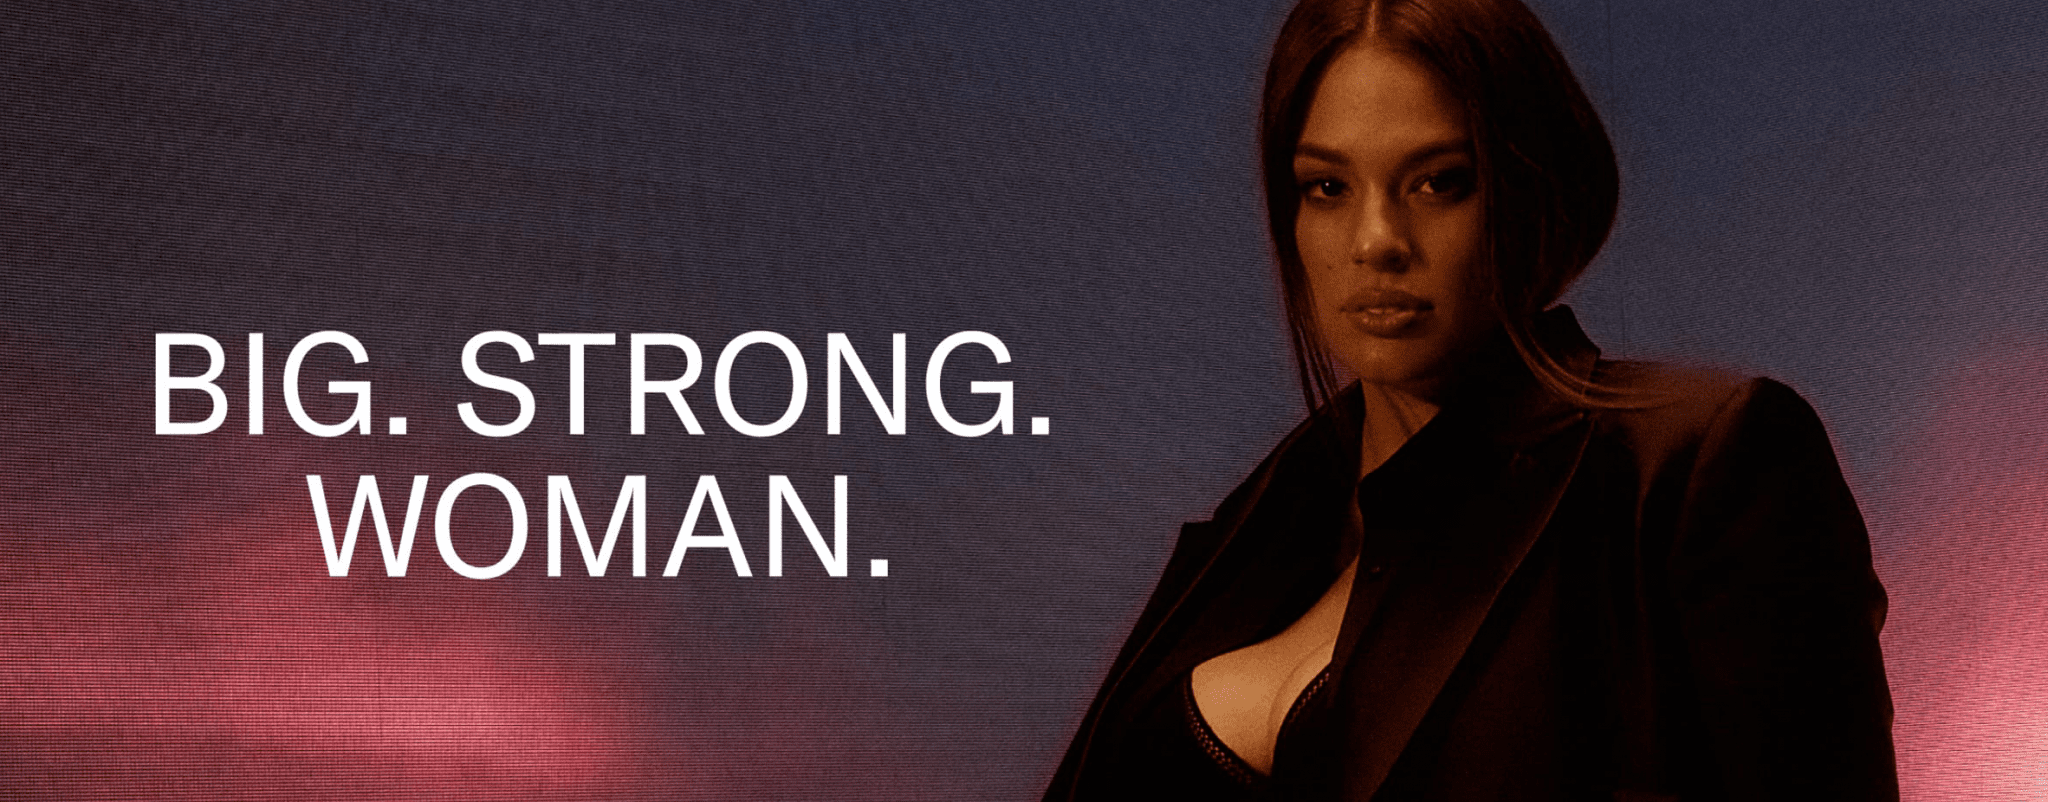 Big. Strong. Woman. campaign